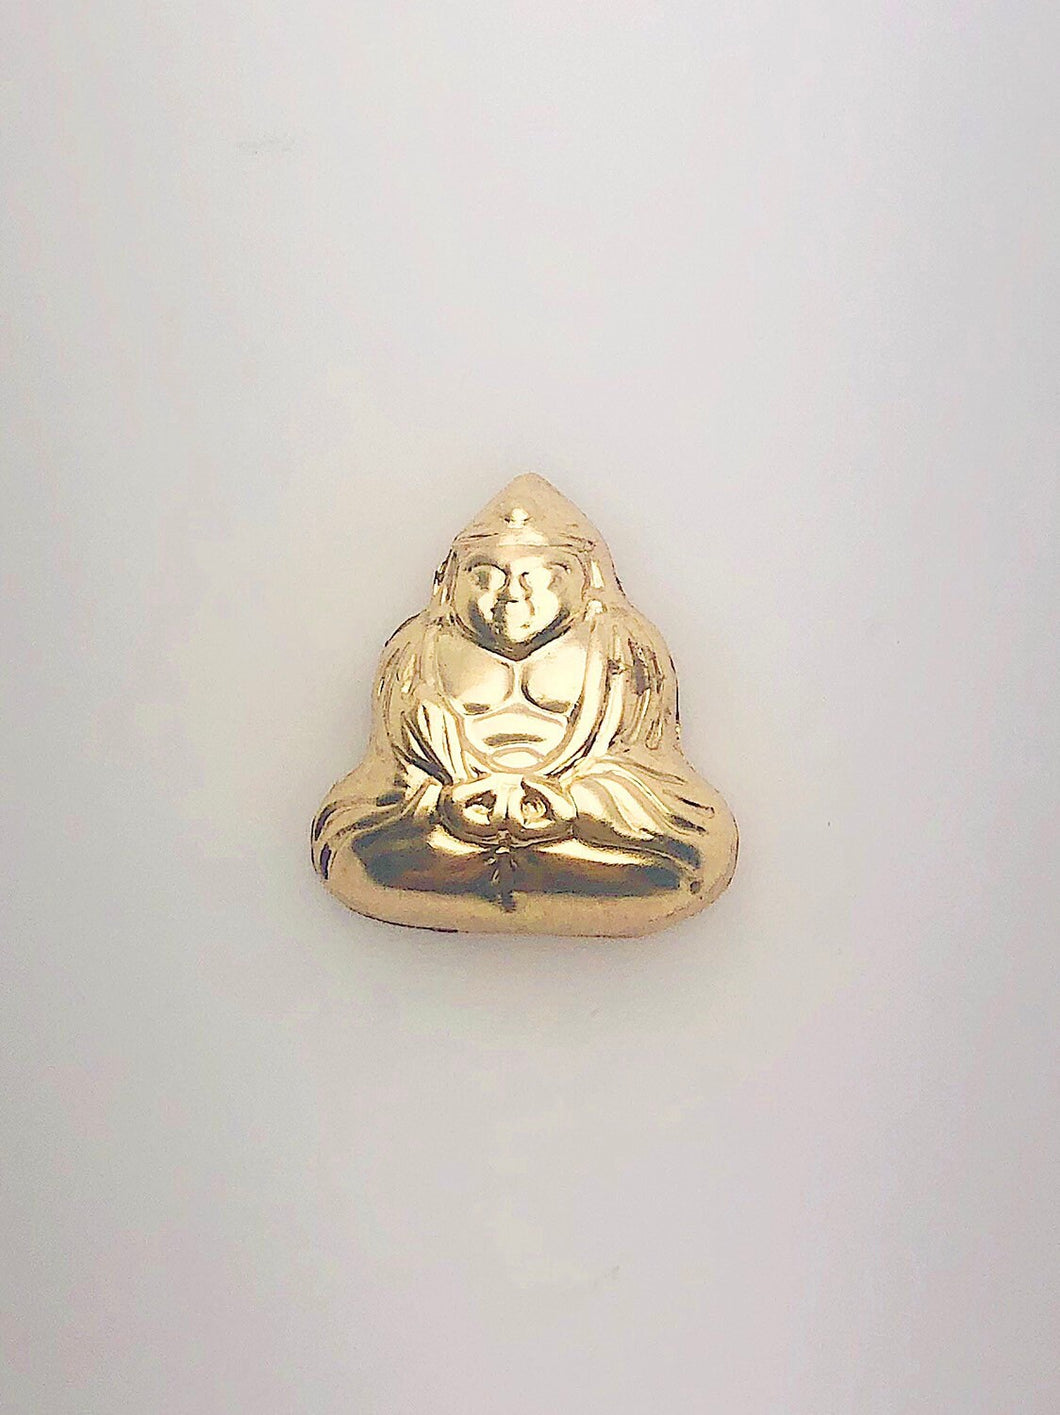 14K Gold Fill Buddah Charm, 14.0x16.0mm, Made in USA - T81